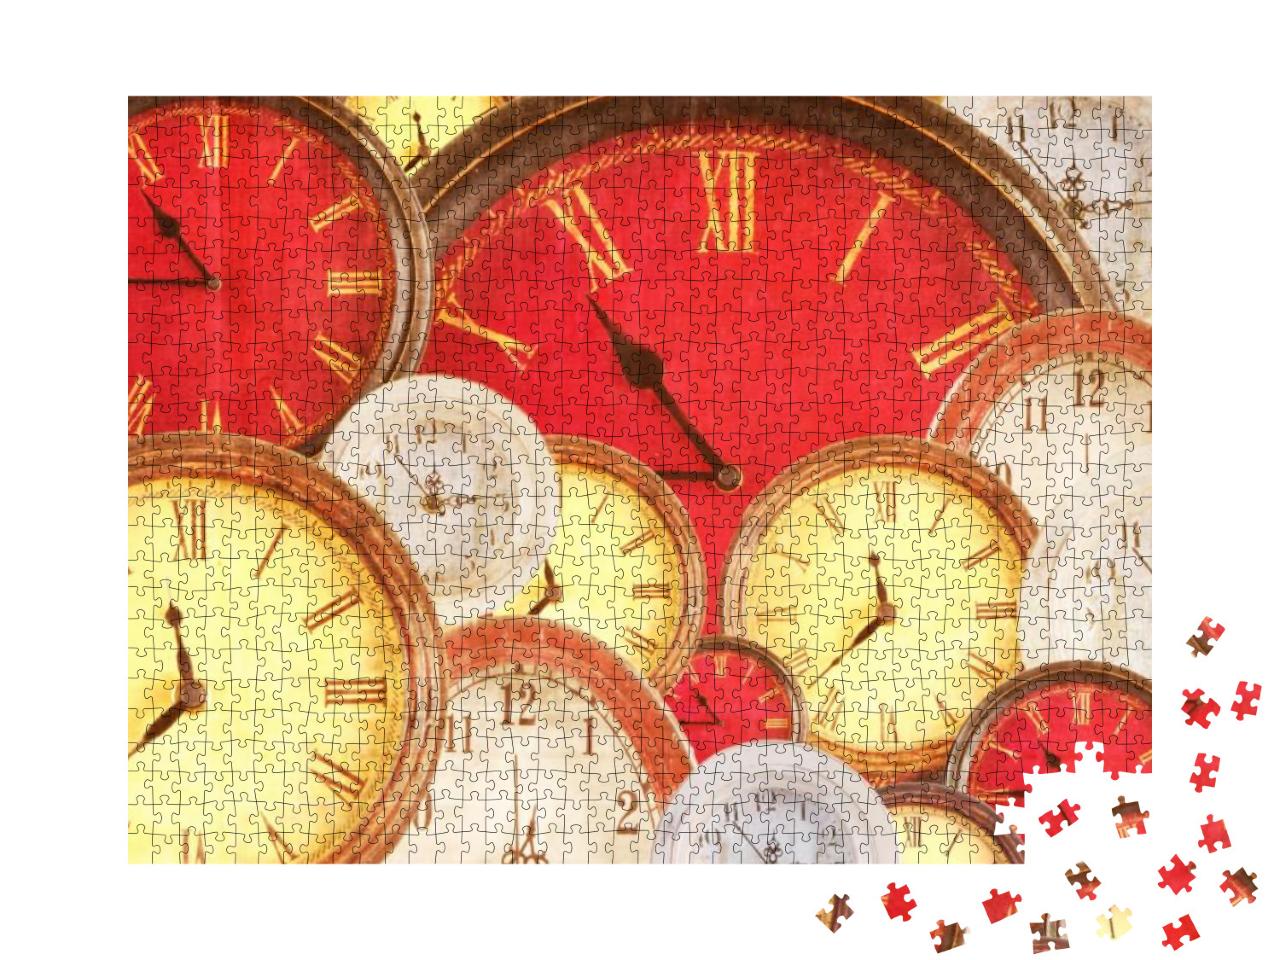 Many Vintage Clocks Filling Background with a Grunge Over... Jigsaw Puzzle with 1000 pieces